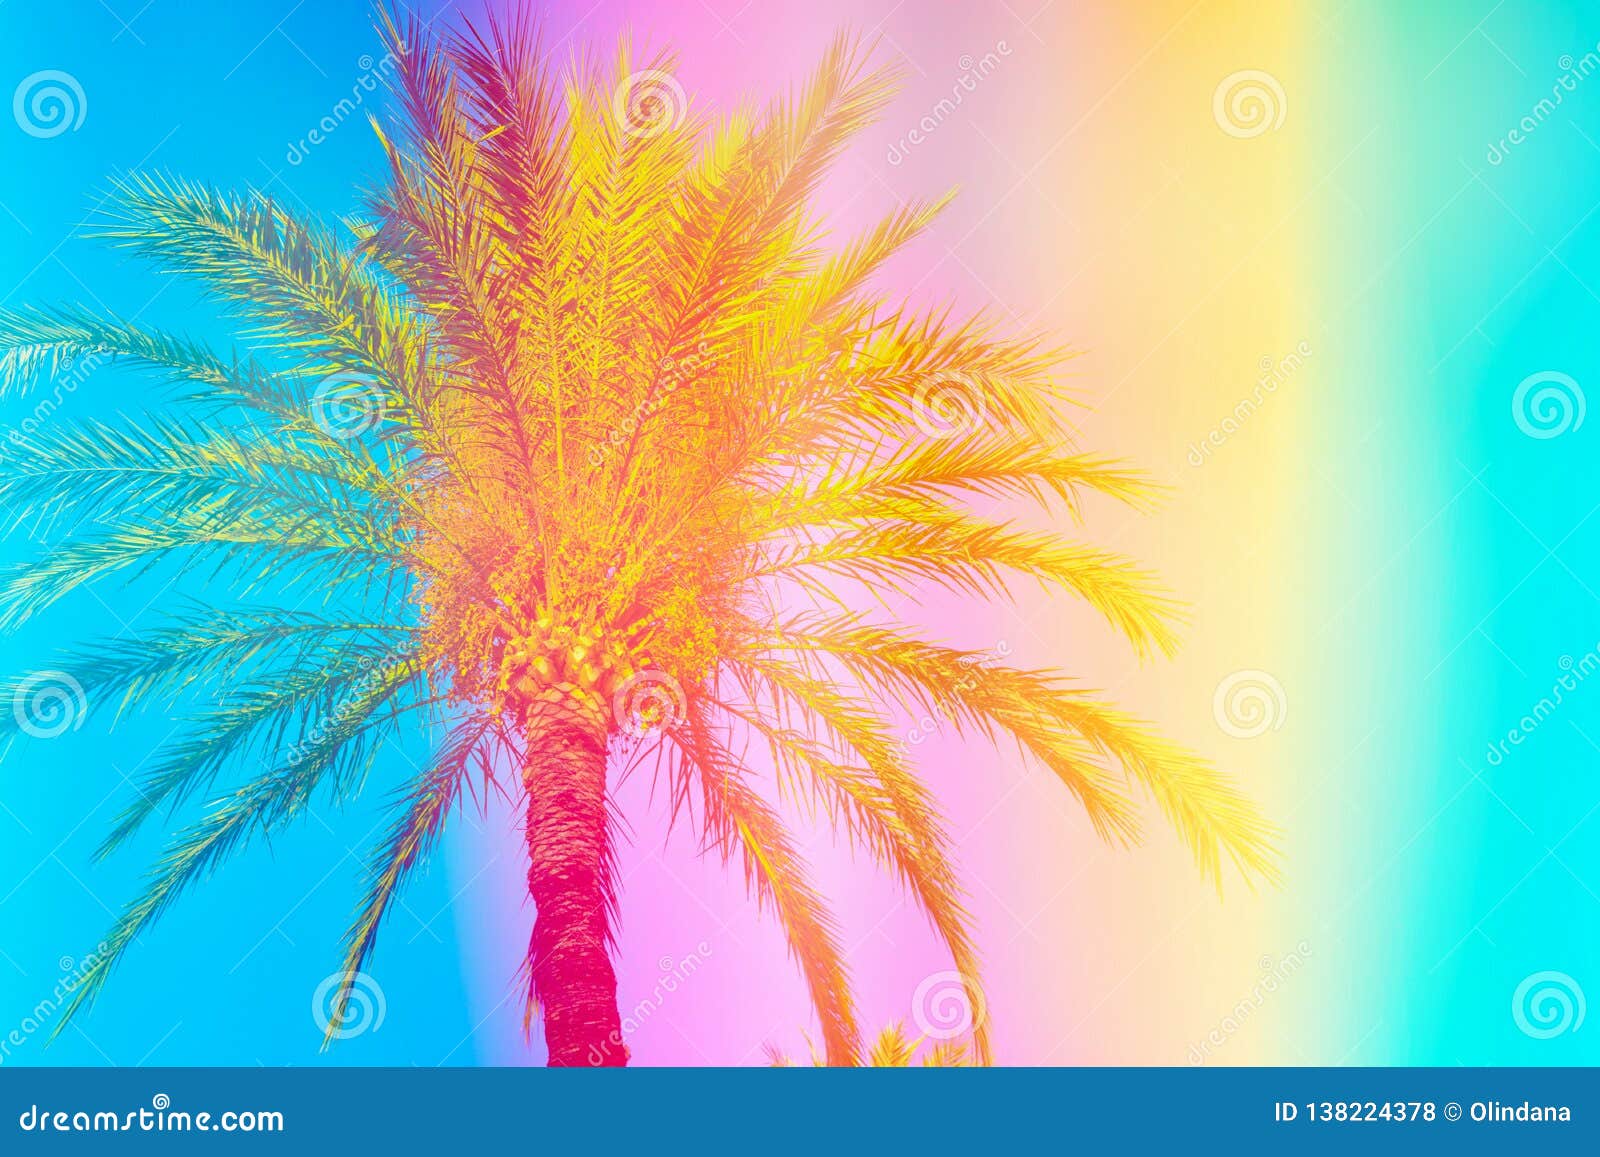 feathery palm tree on sky background toned in vibrant saturated rainbow neon pastel colors. surrealistic funky style. tropical